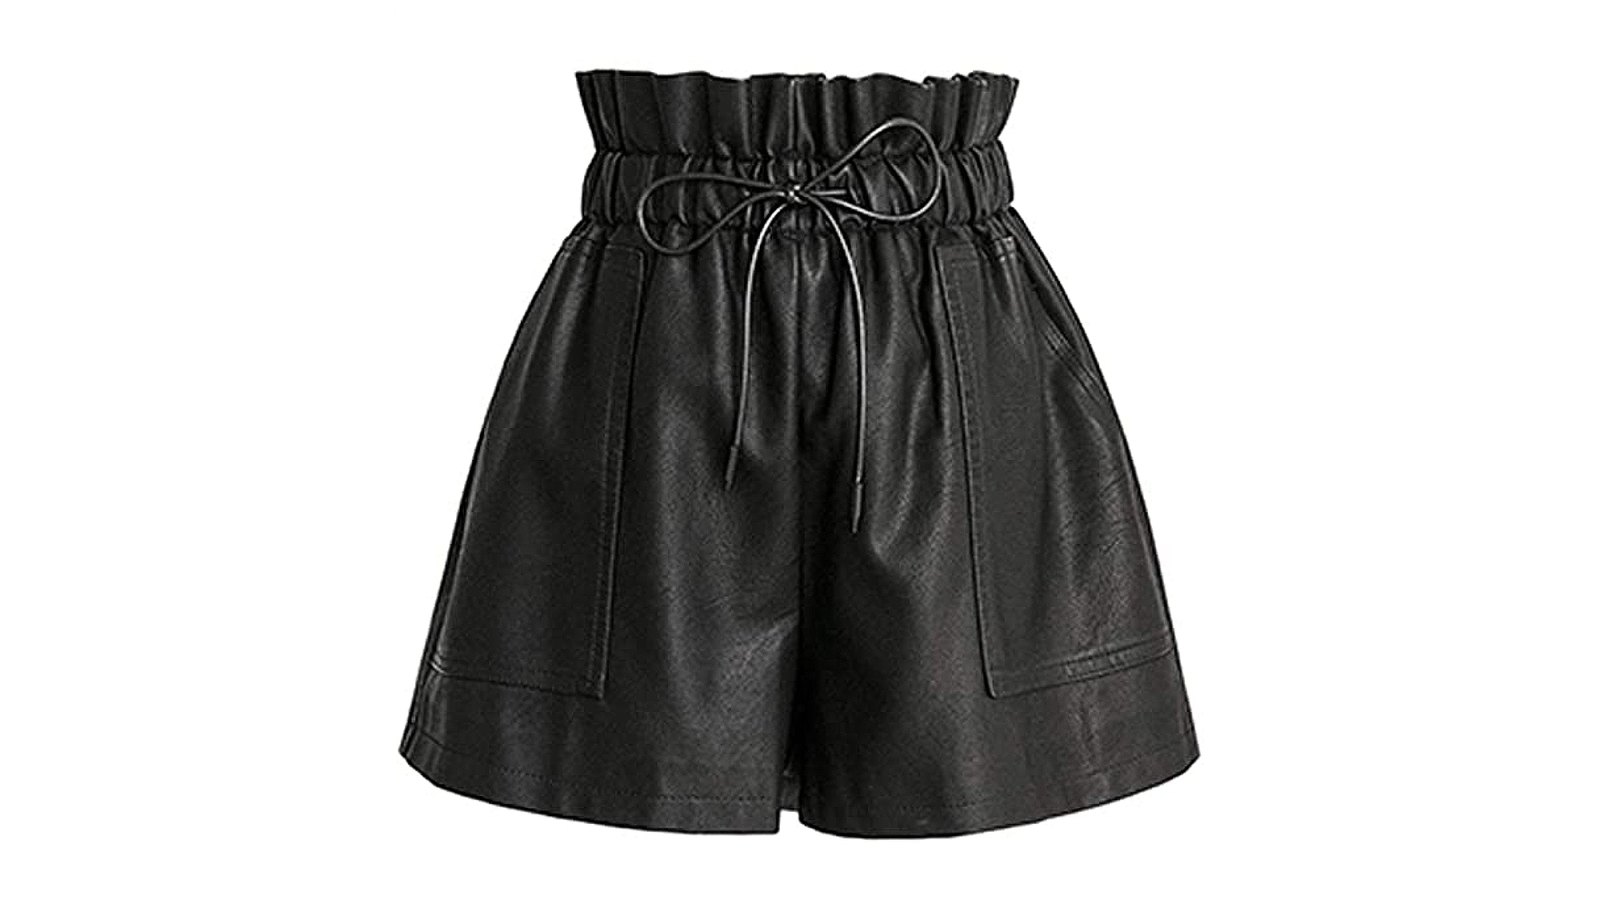 SCHHJZPJ High Waisted Wide Leg Black Faux Leather Shorts for Women